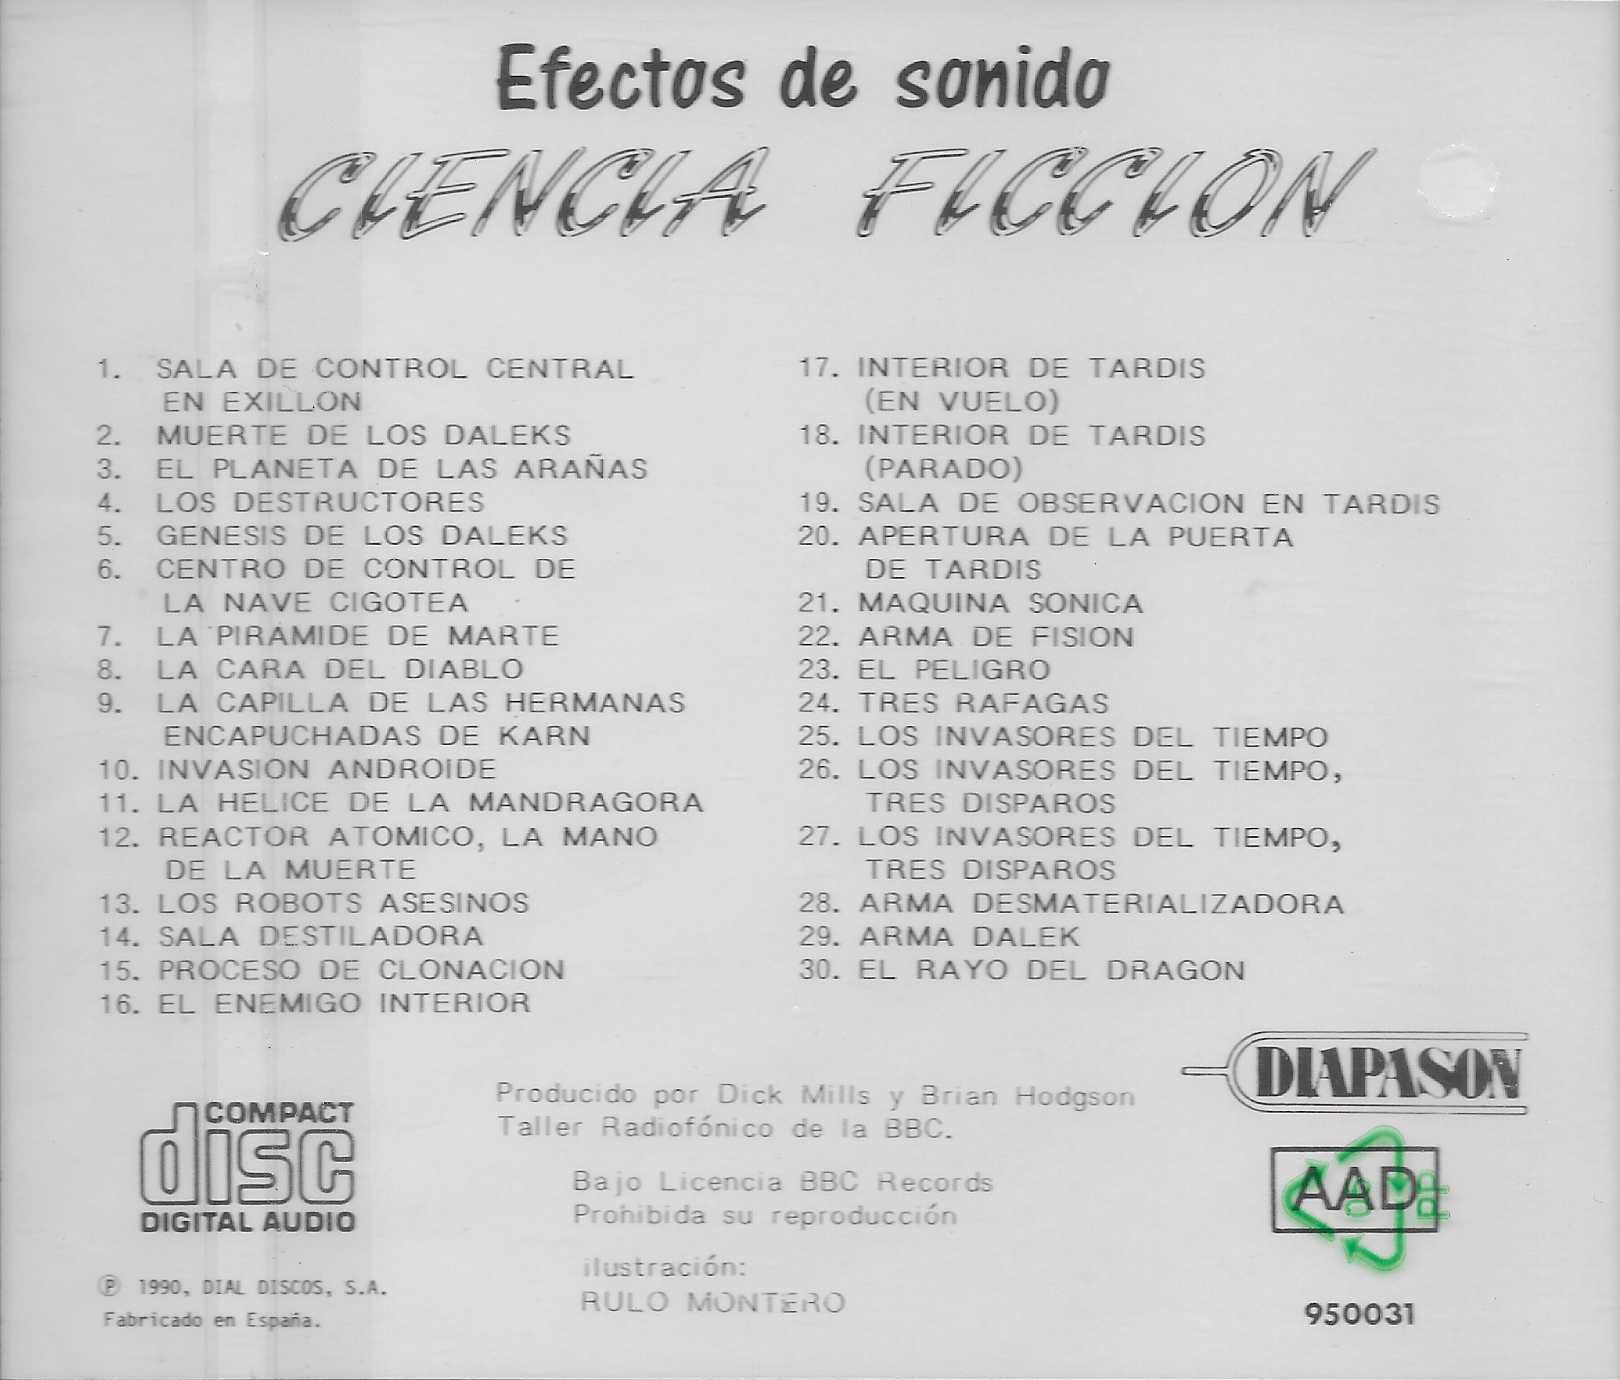 Picture of 95 0031 Effectos de sonido - Volume 19 by artist Various from the BBC records and Tapes library